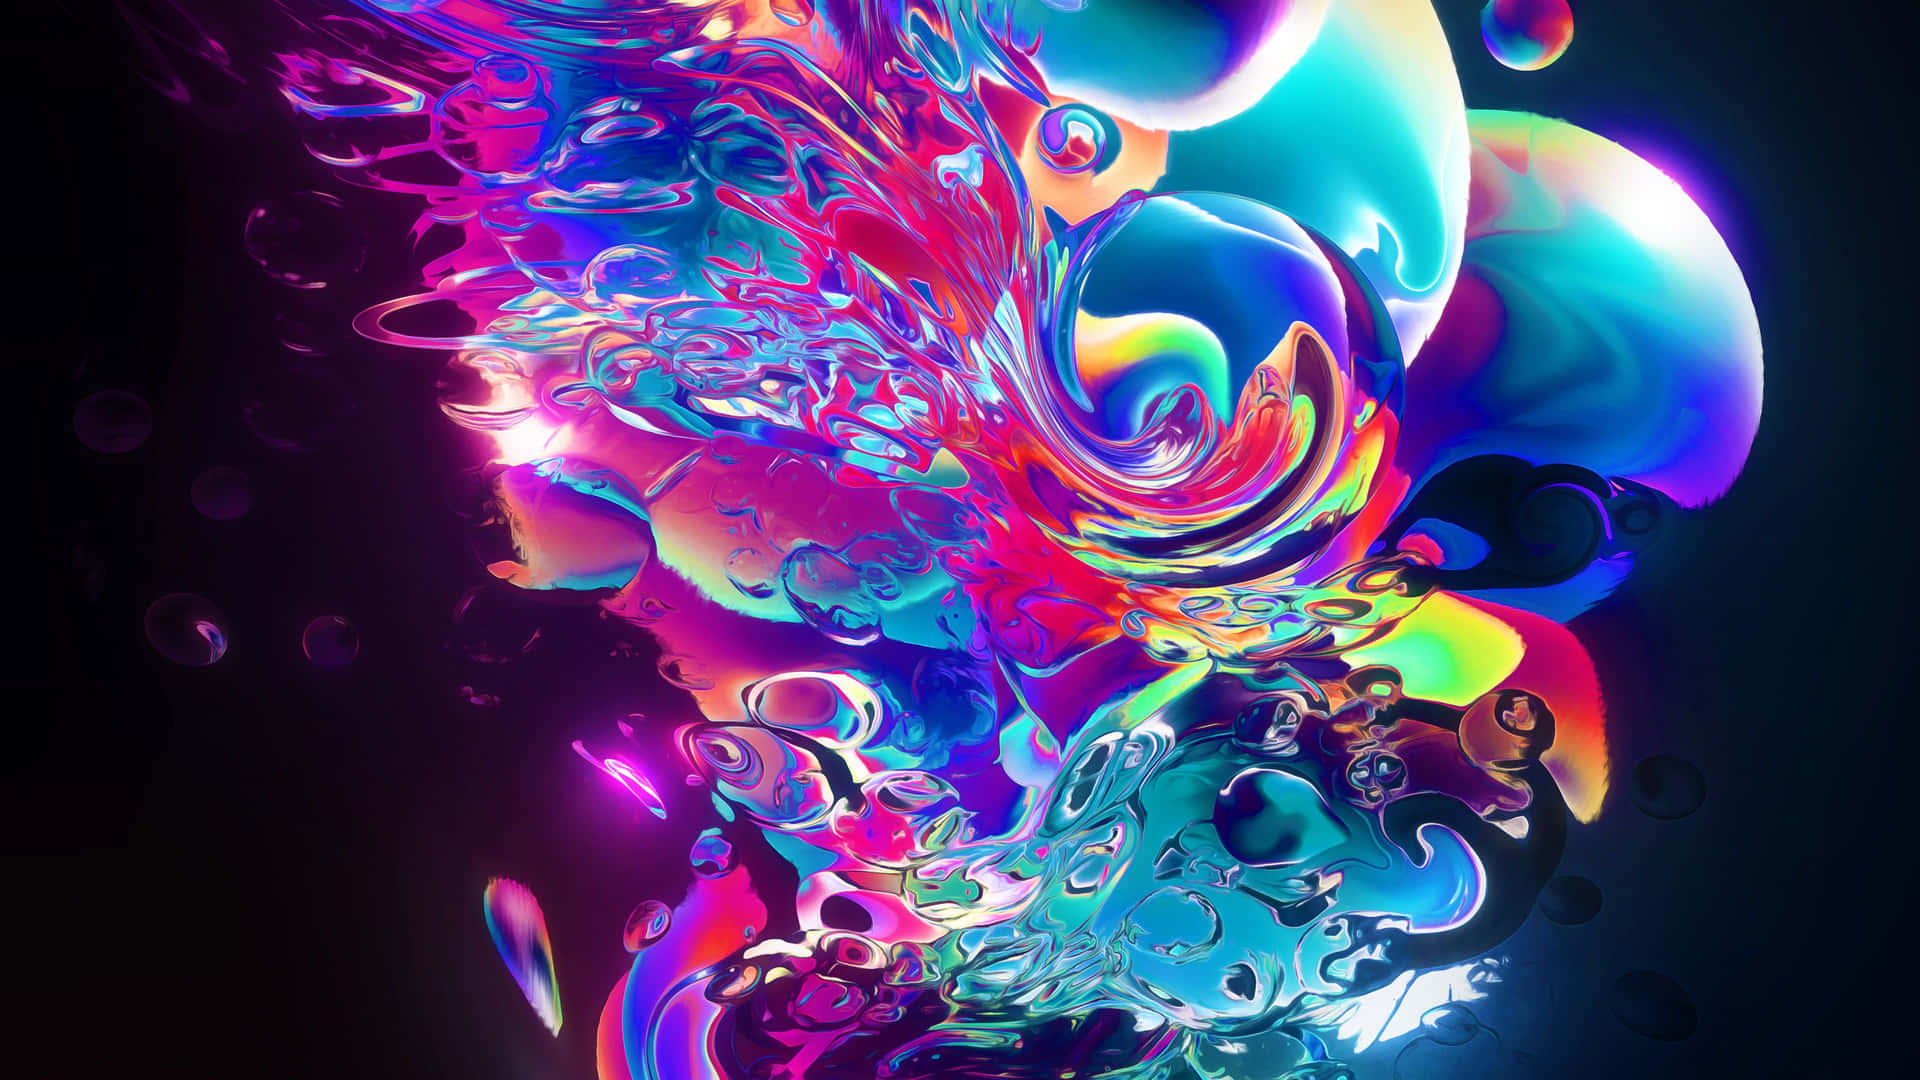 Colorful Abstract Art In The Dark Background